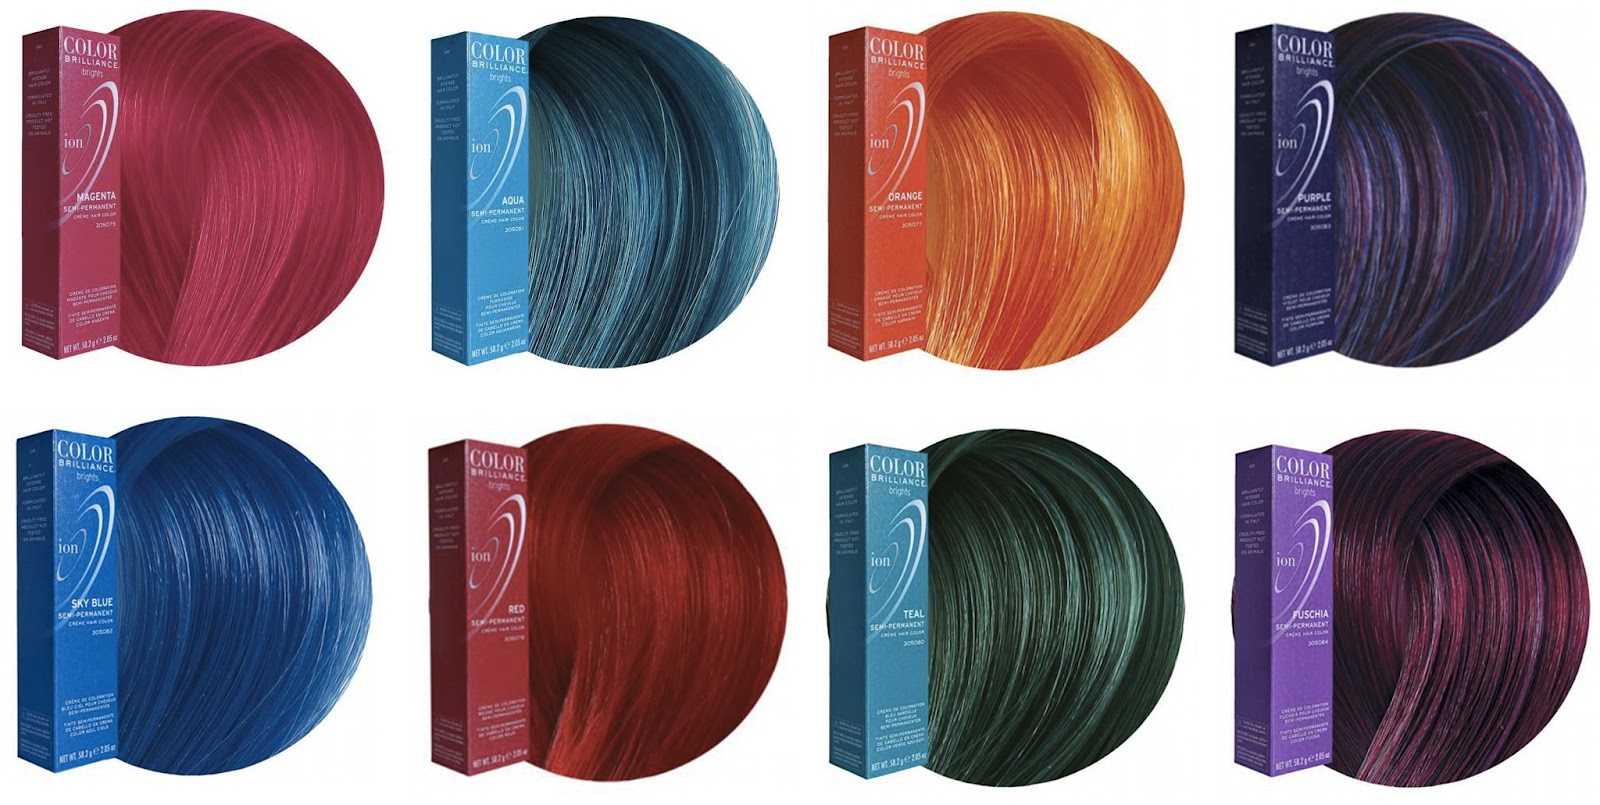 1. Ion Color Brilliance Brights Semi-Permanent Hair Color in Sky Blue - wide 1